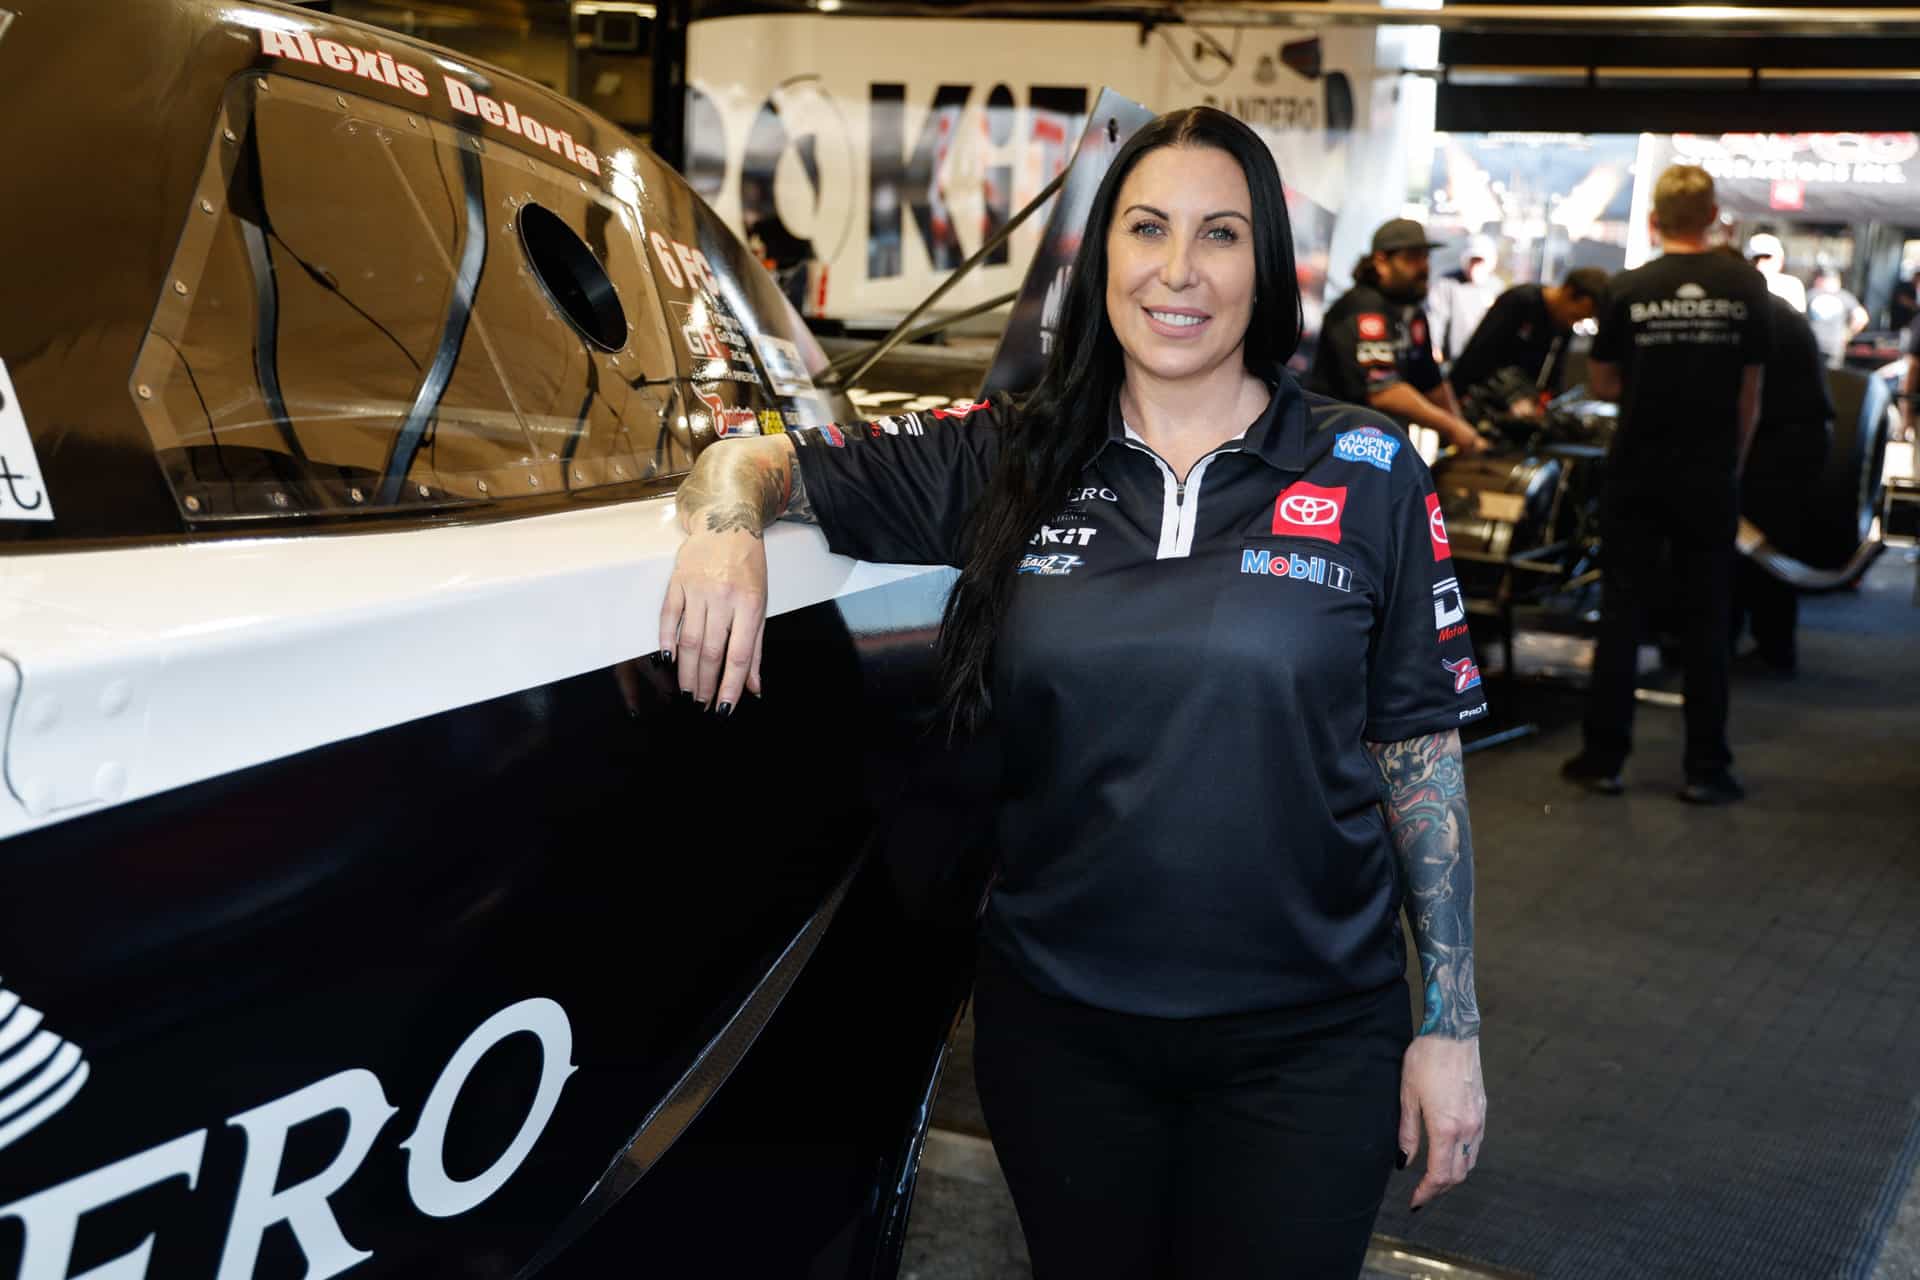 Alexis DeJoria reminisces about her first season in NHRA Funny Cars.